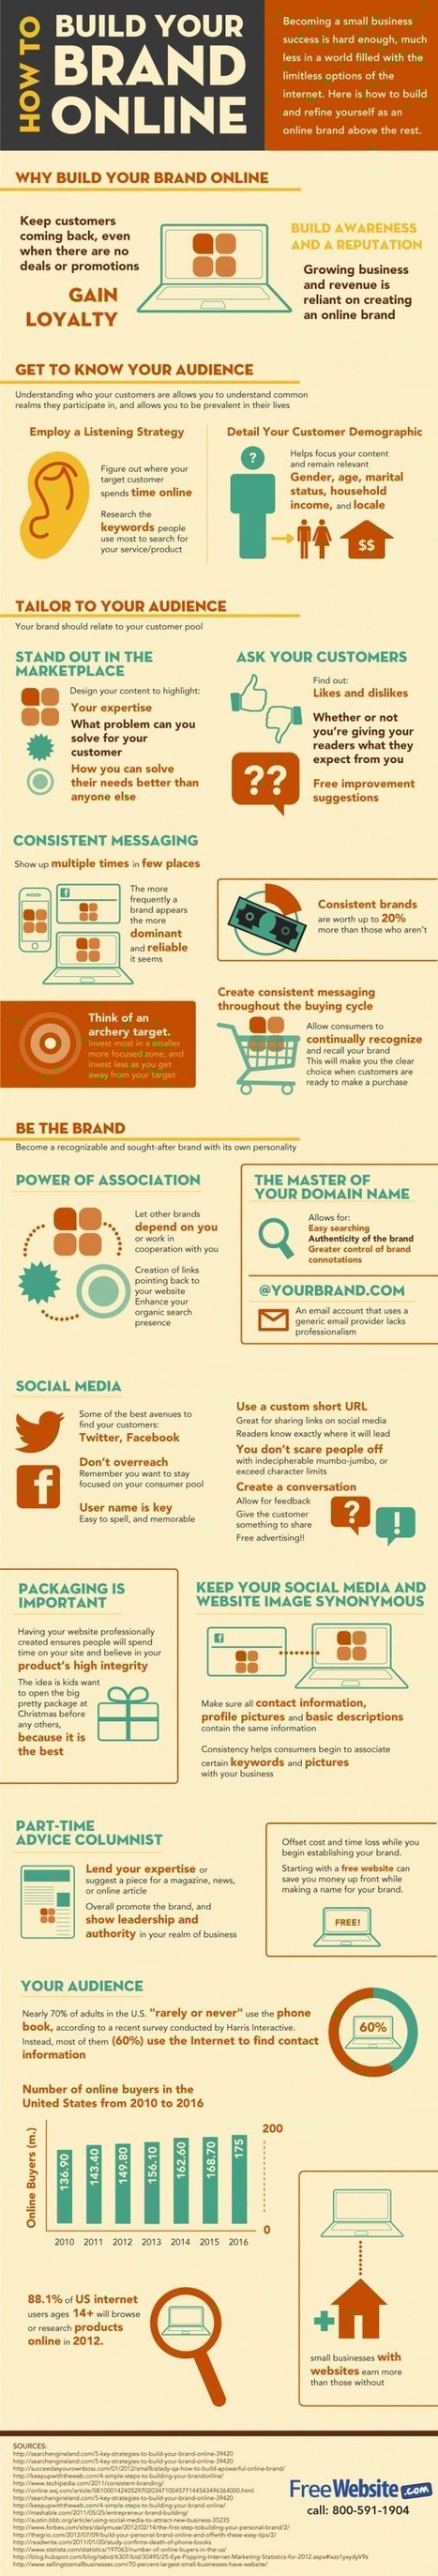 Why You Need to Build Your Brand Online [infographic] | Digital-News on Scoop.it today | Scoop.it